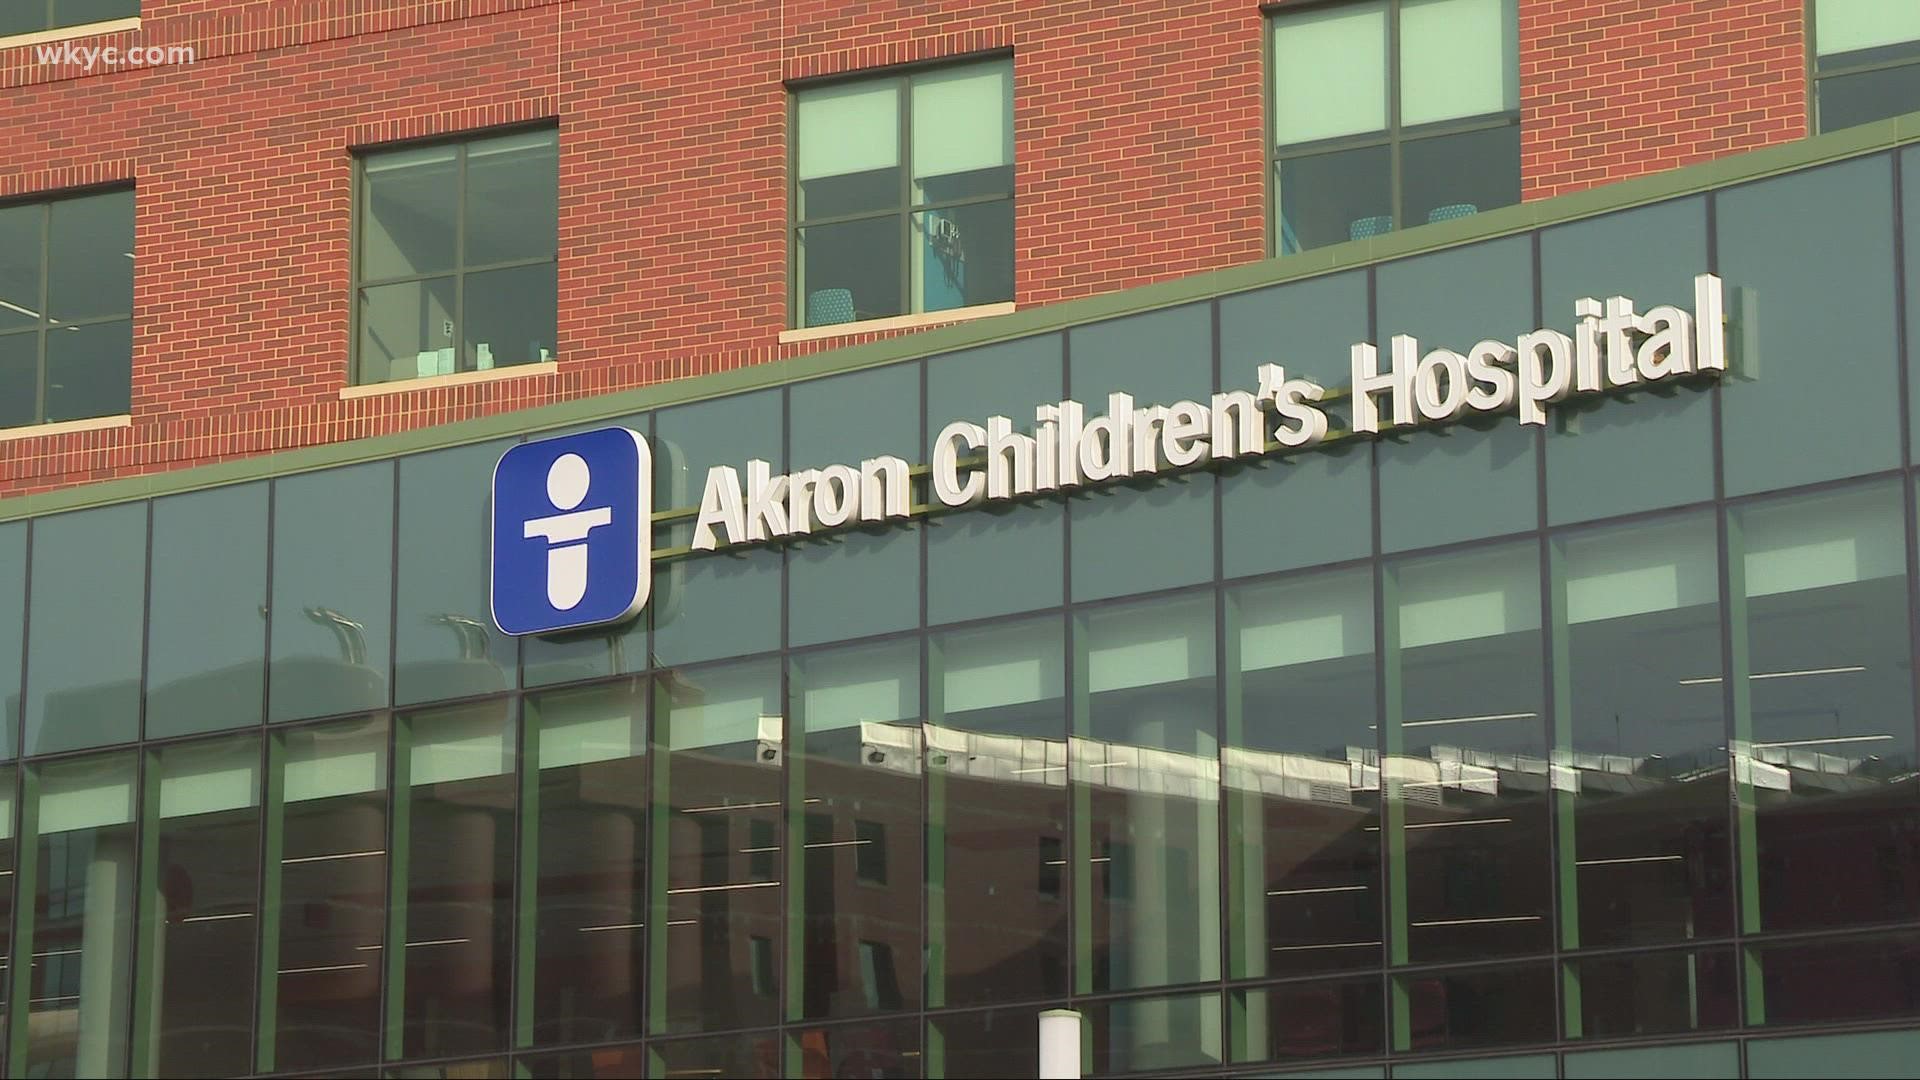 Employees at Akron Children's Hospital who remain unvaccinated against COVID-19 have been notified they will be placed on unpaid leave.